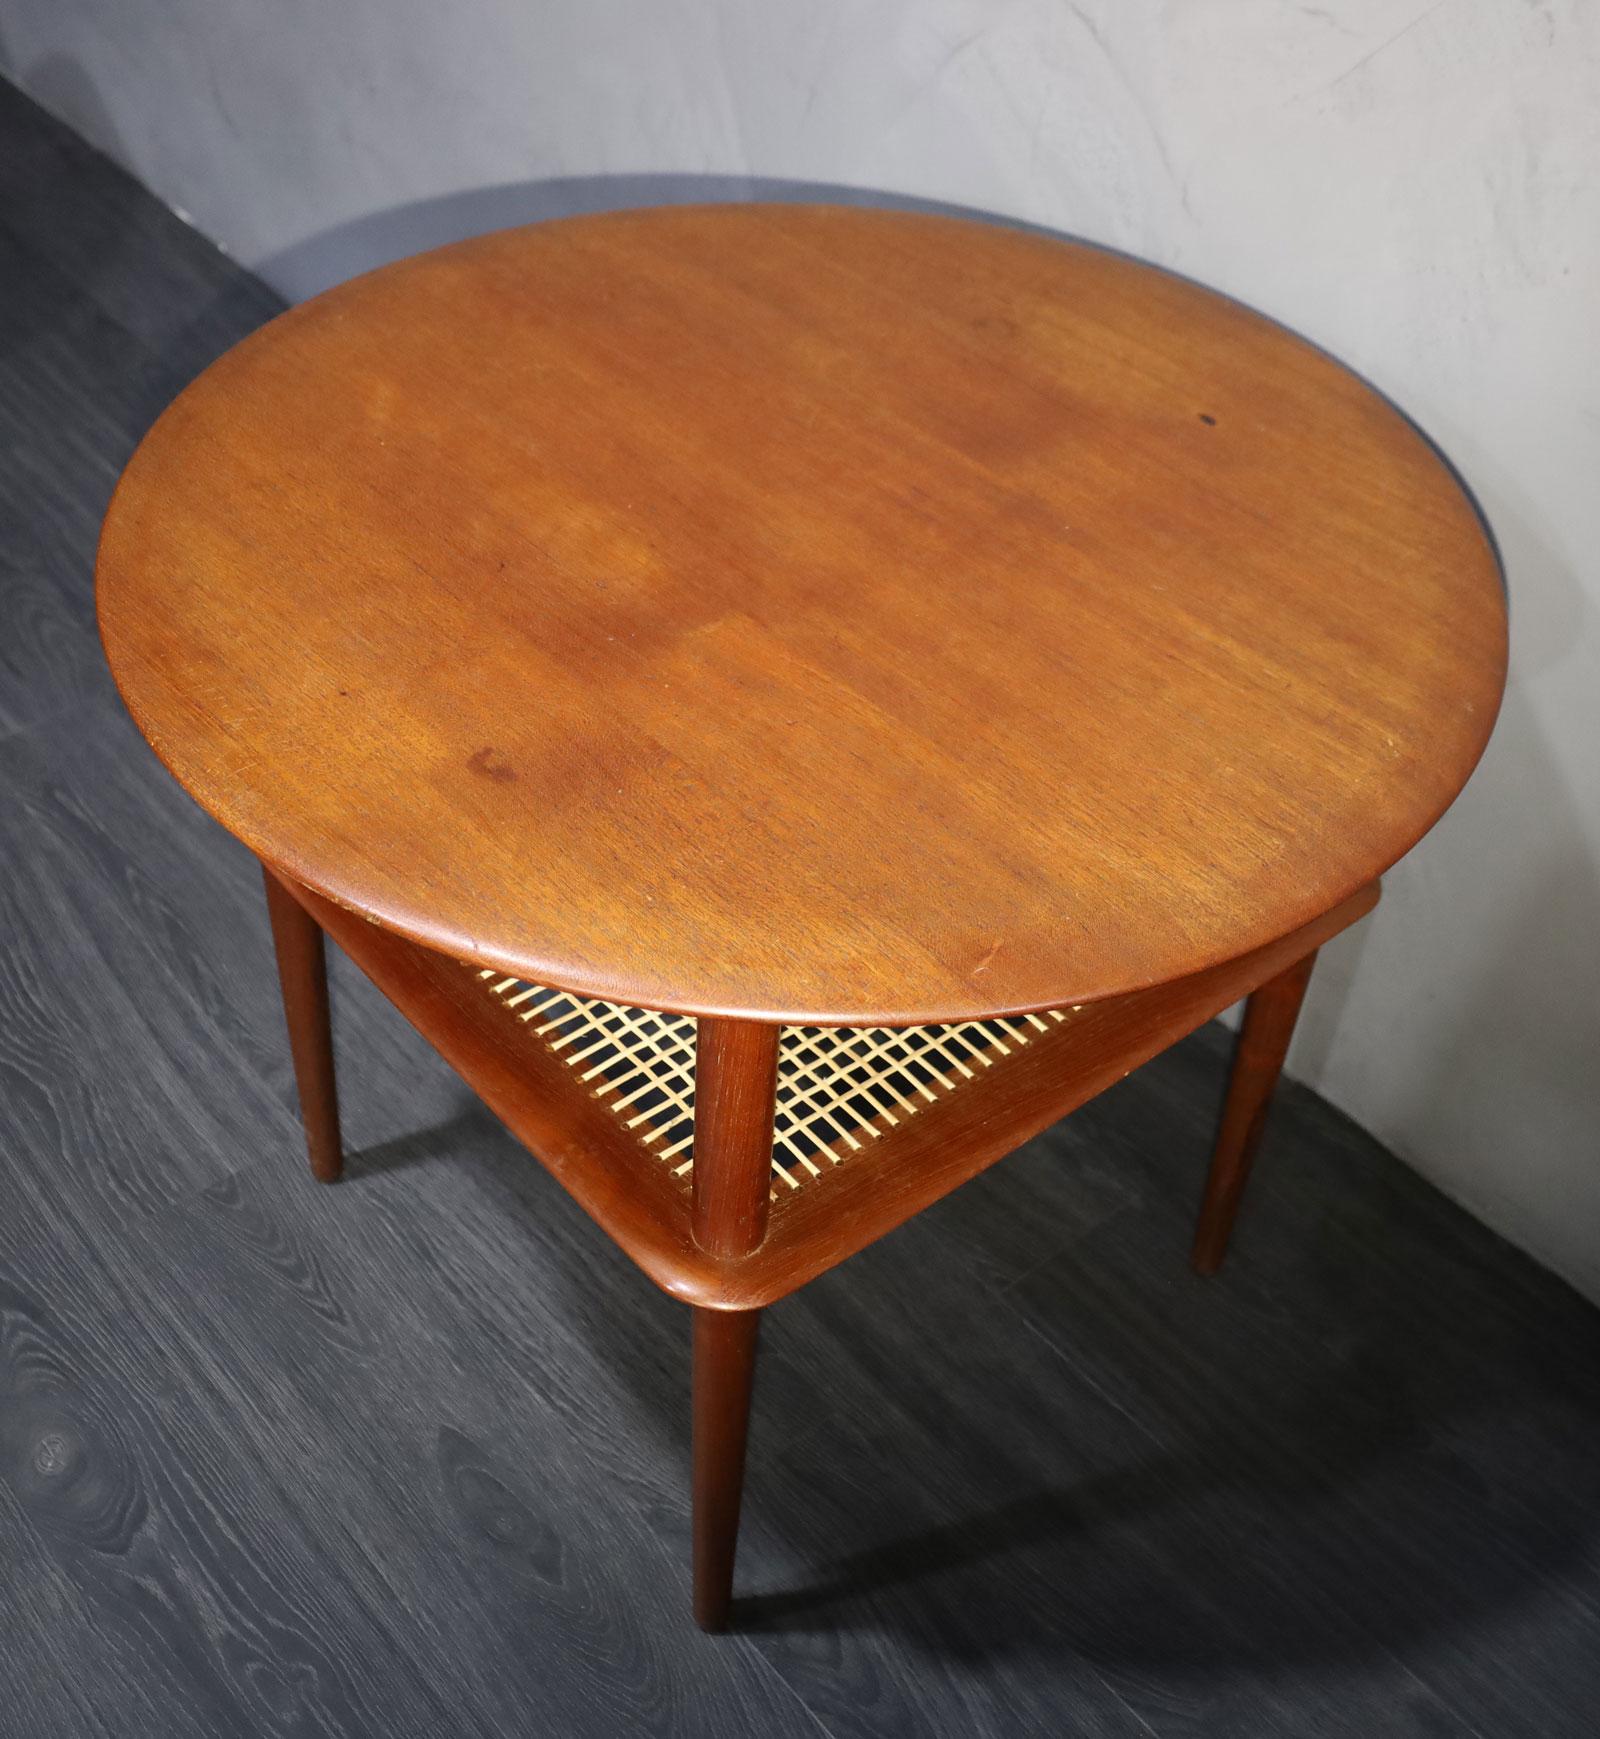 Teak side table with a cane lower shelf. Design by Peter Hvidt and Orla Mølgaard-Nielsen for France and Daverkosen and distributed by John Stuart, Inc in the USA.